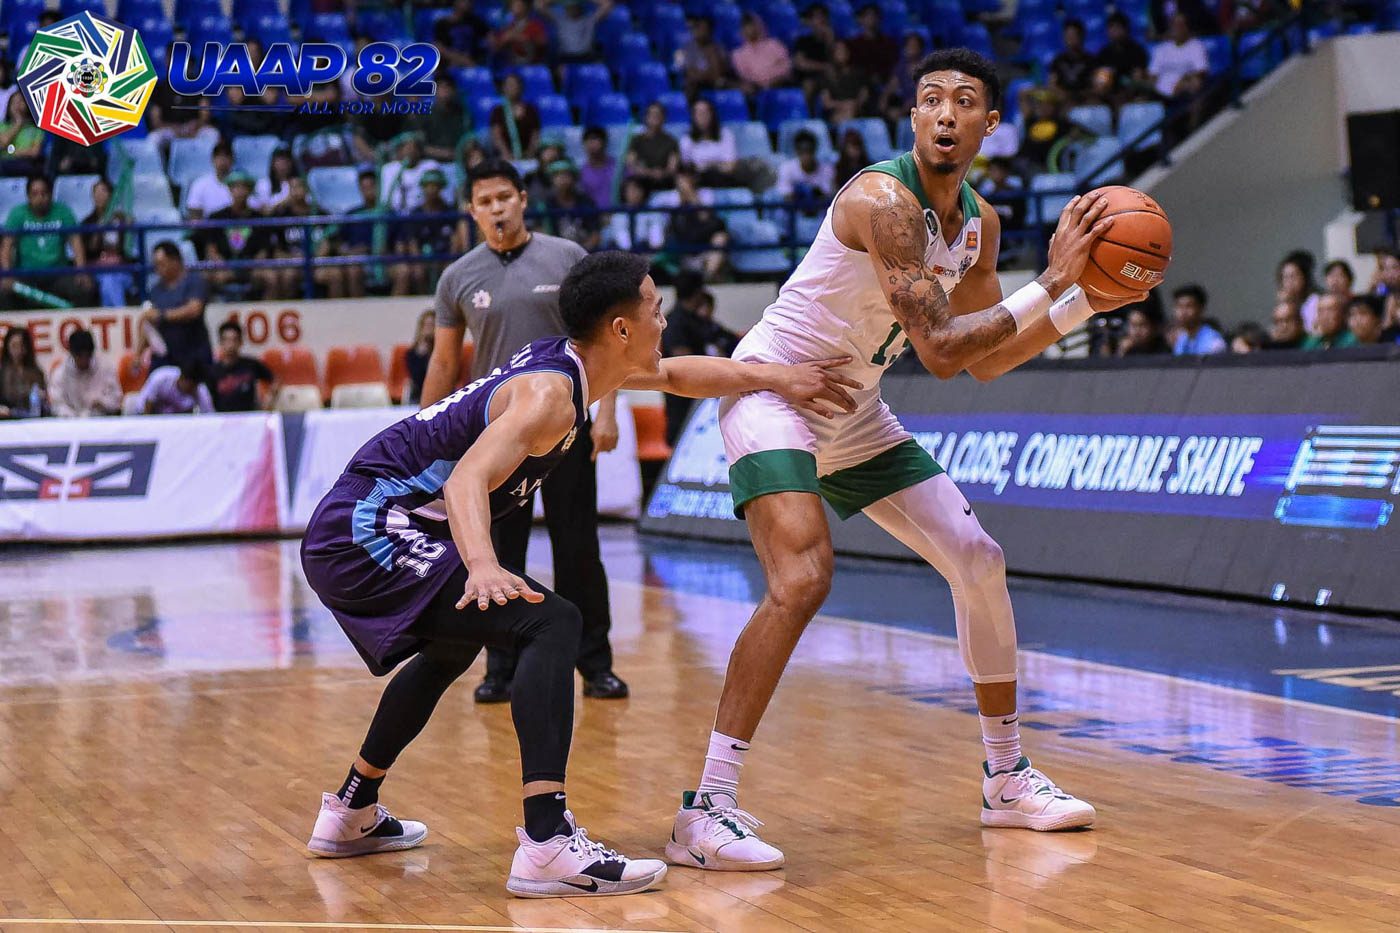 BIG BOOST. Fil-Am Jamie Malonzo, a consistent double-double performer, drops another one with 12 points and 11 rebounds to help the Green Archers pick up a second win. Photo release 